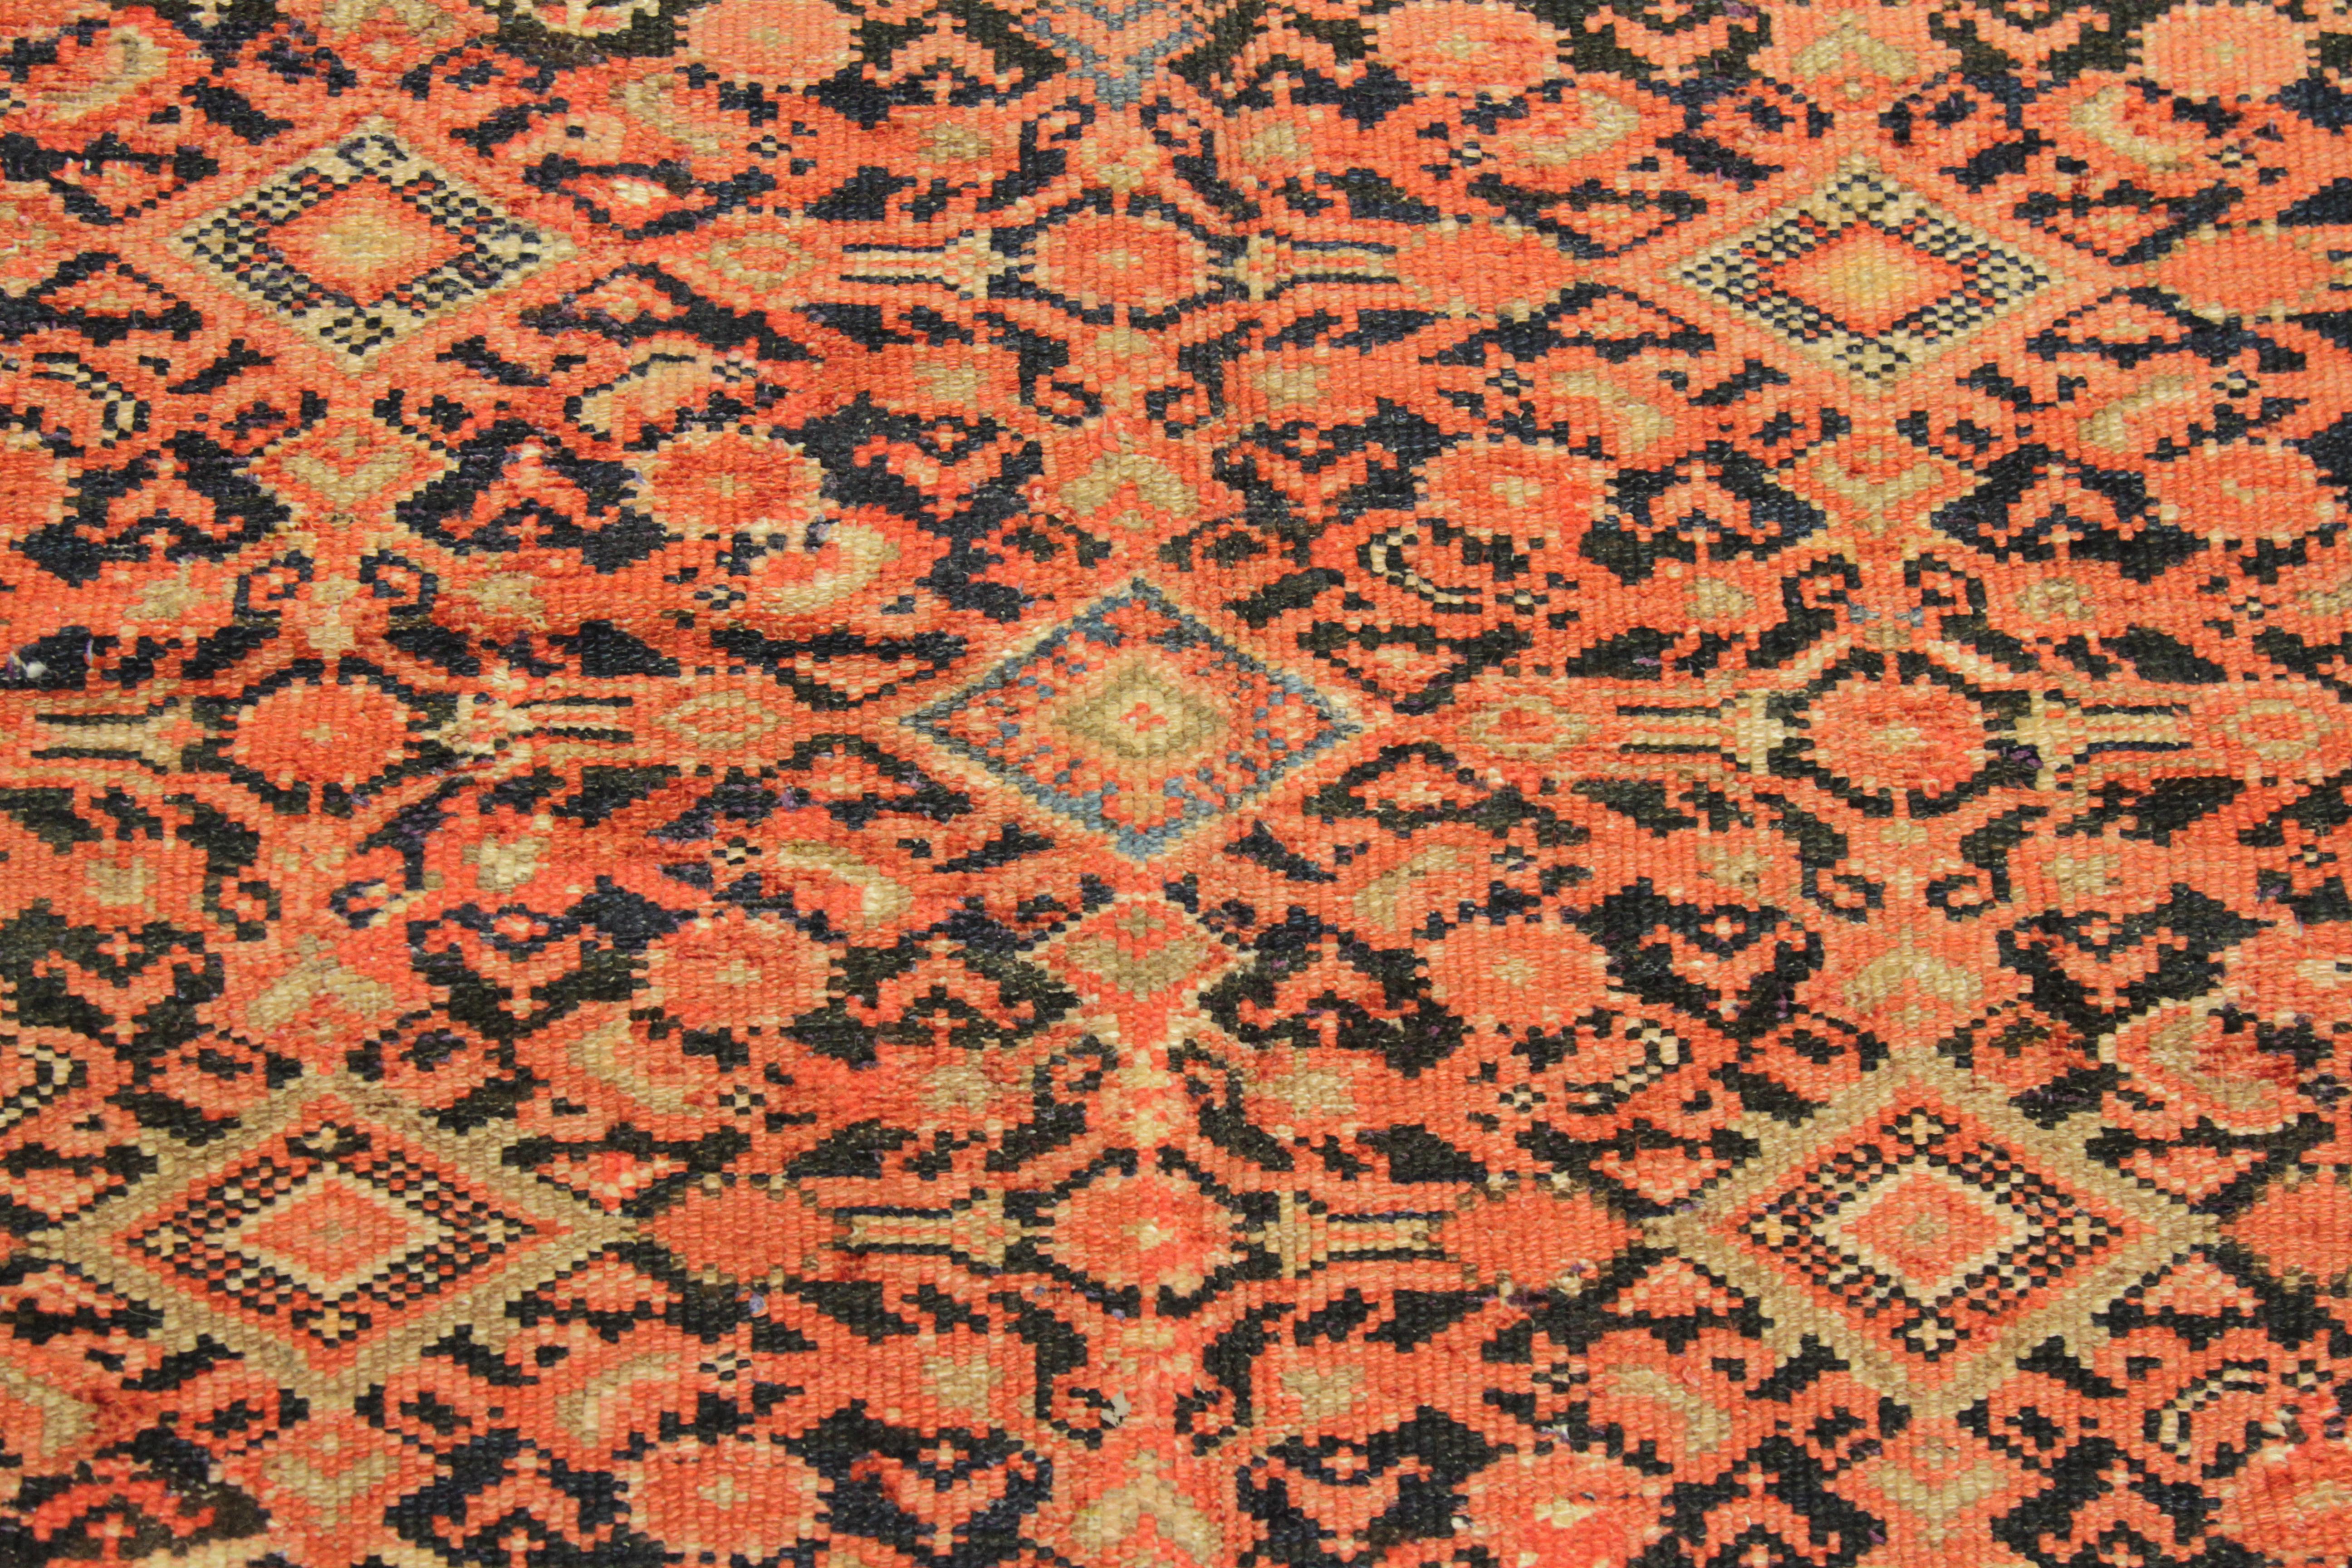 Antique Persian Rug Malayer Design with Orange and Black Details, circa 1930s For Sale 6